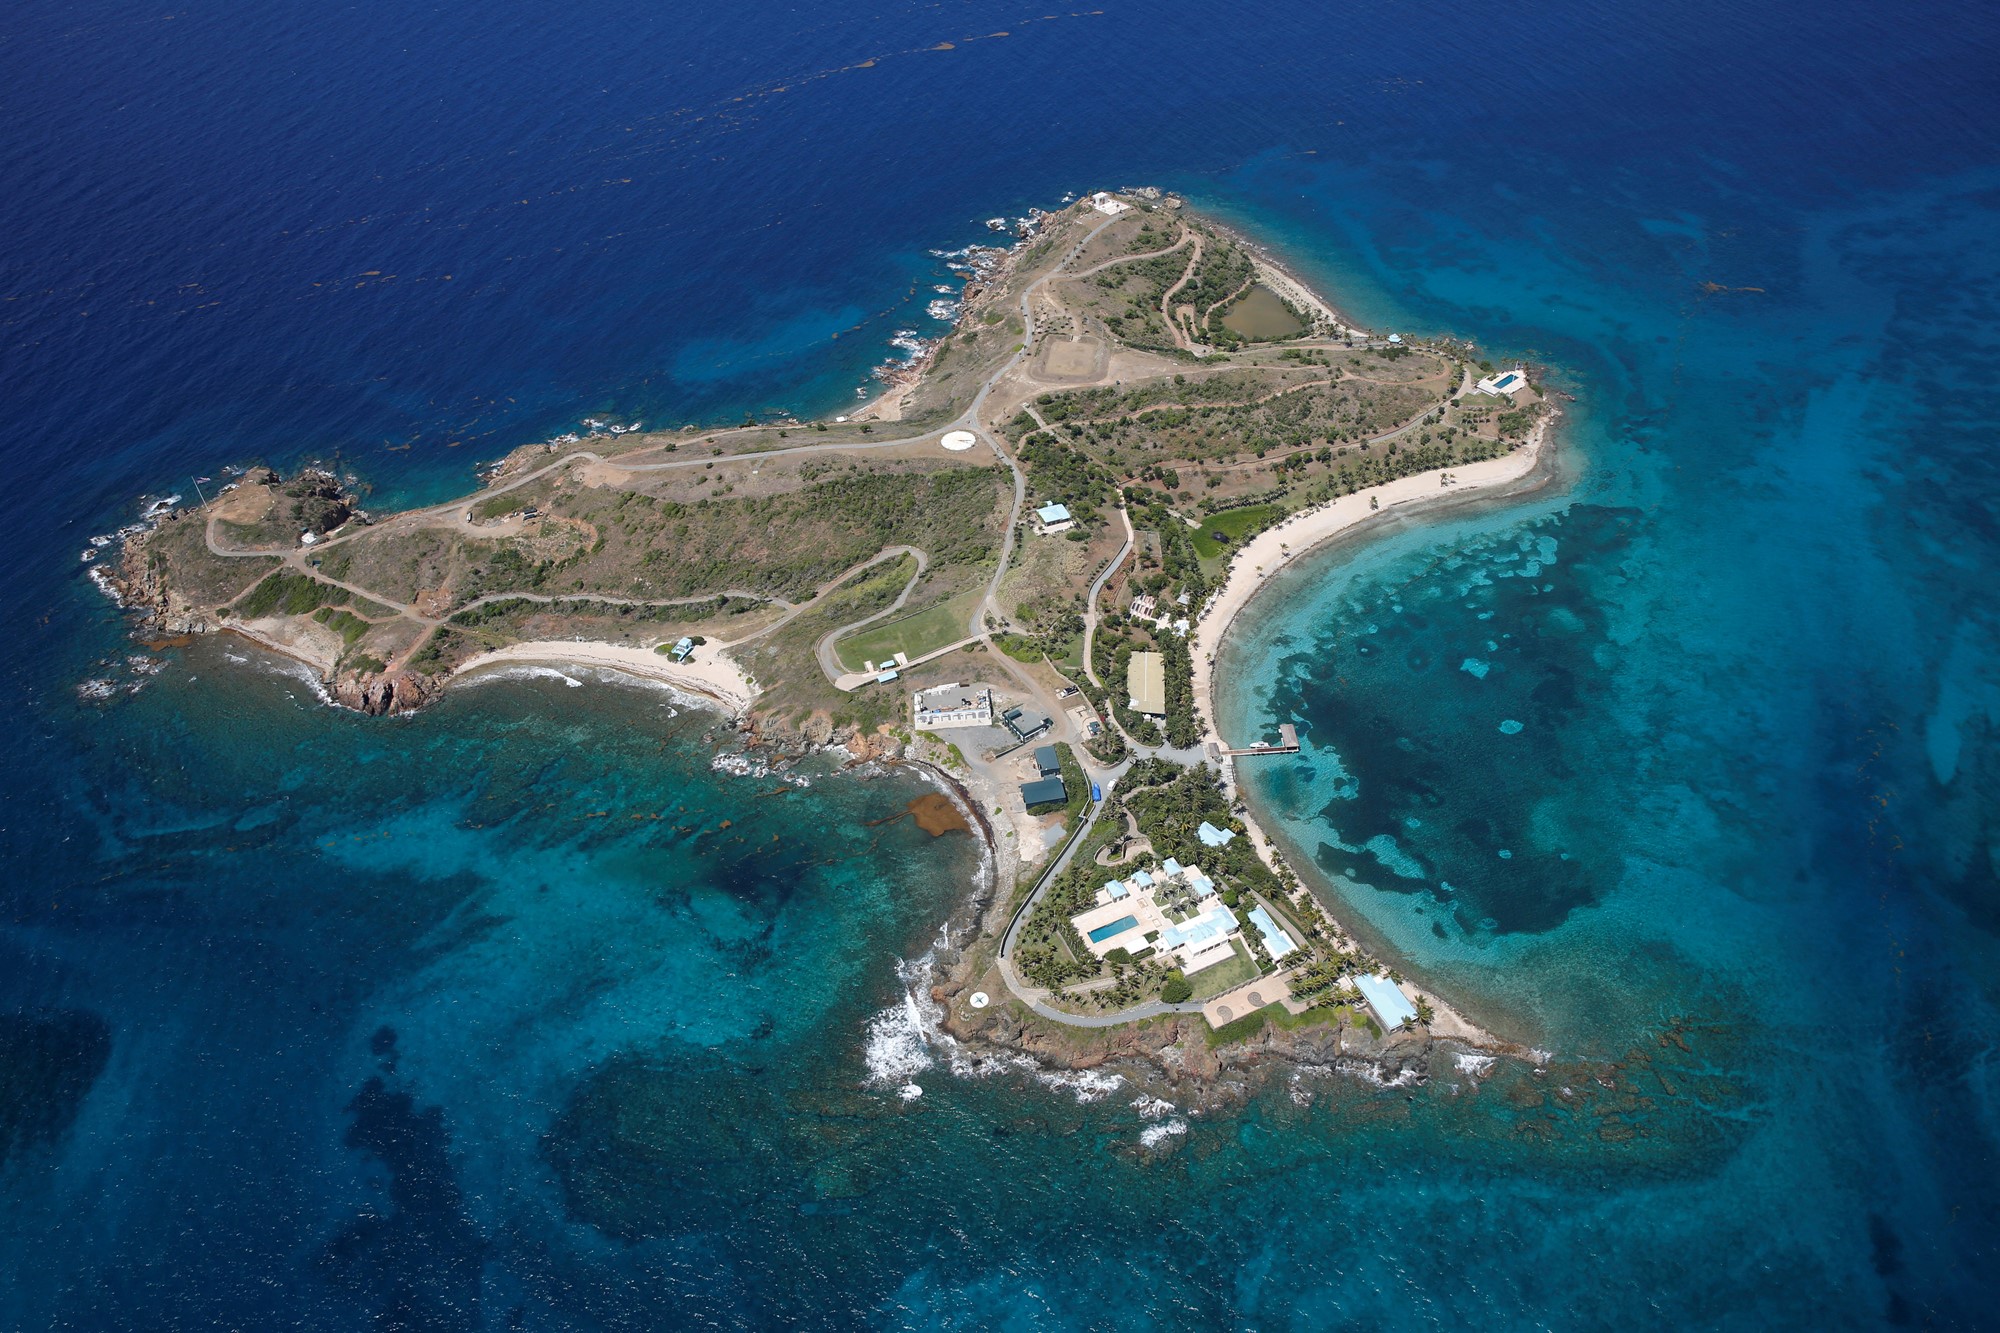 An aerial photo of a small private island with some buildings and roads